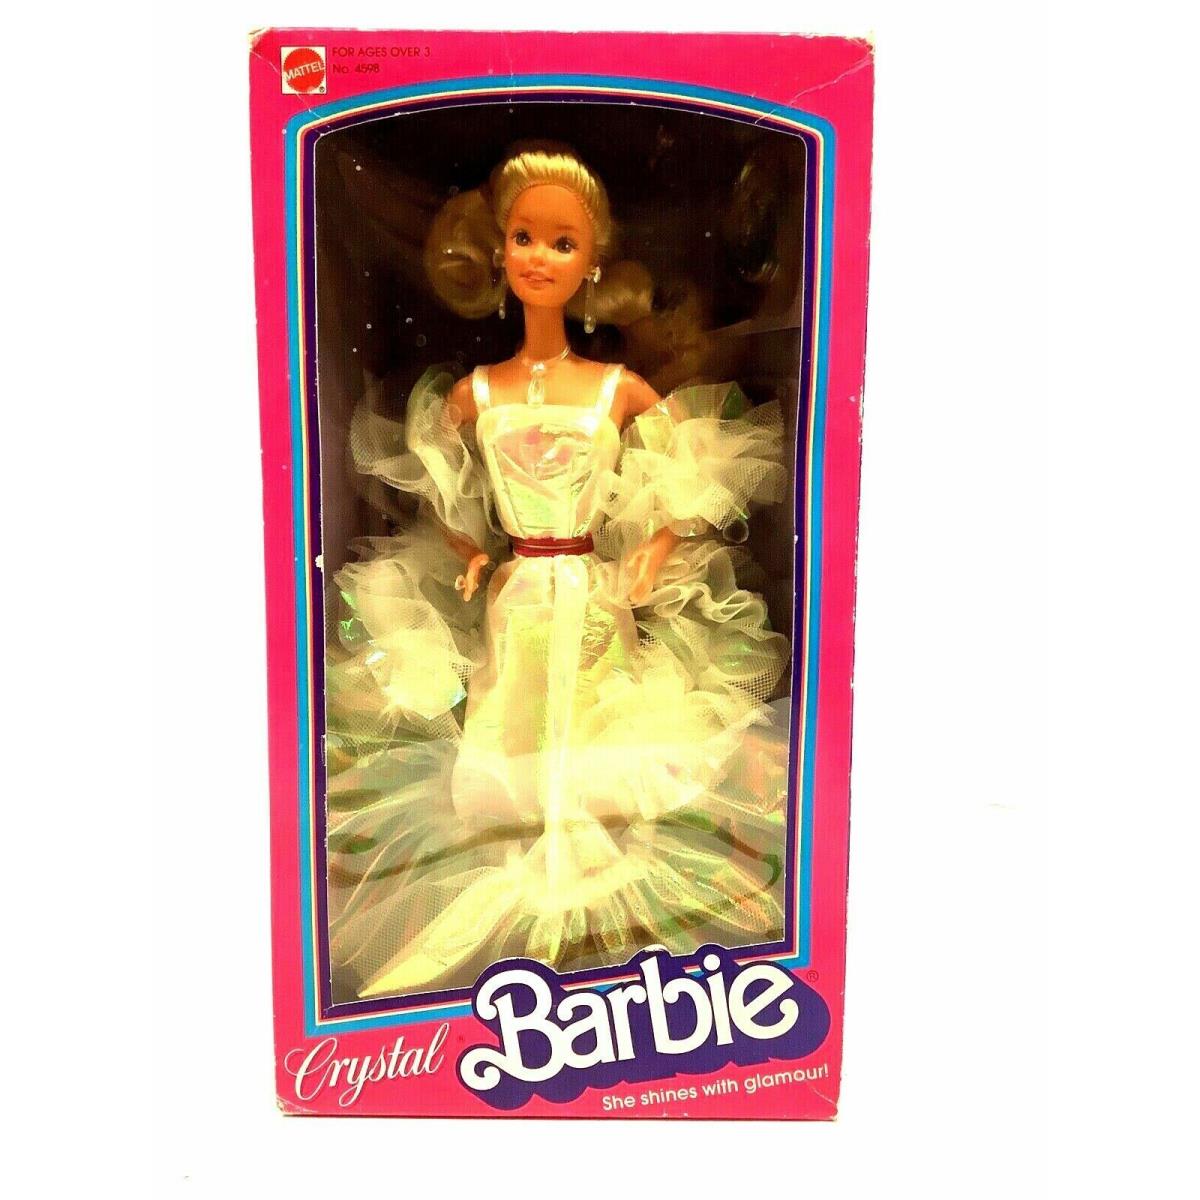 Mattel Crystal Barbie - She Shines with Glamour 1983 No 4598